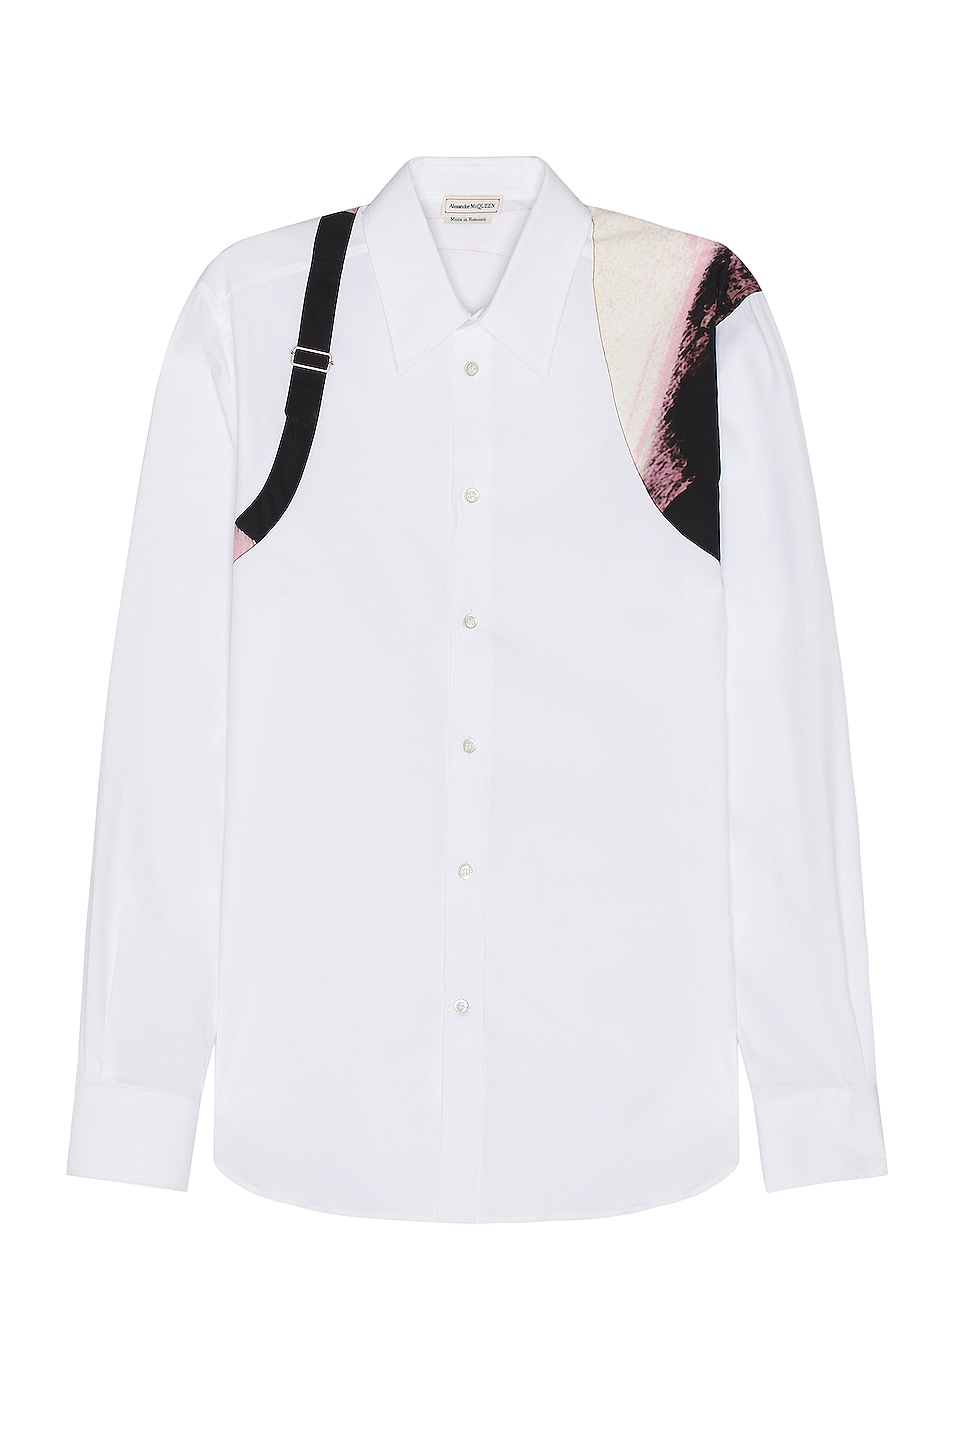 Image 1 of Alexander McQueen Printed Harness Shirt in White